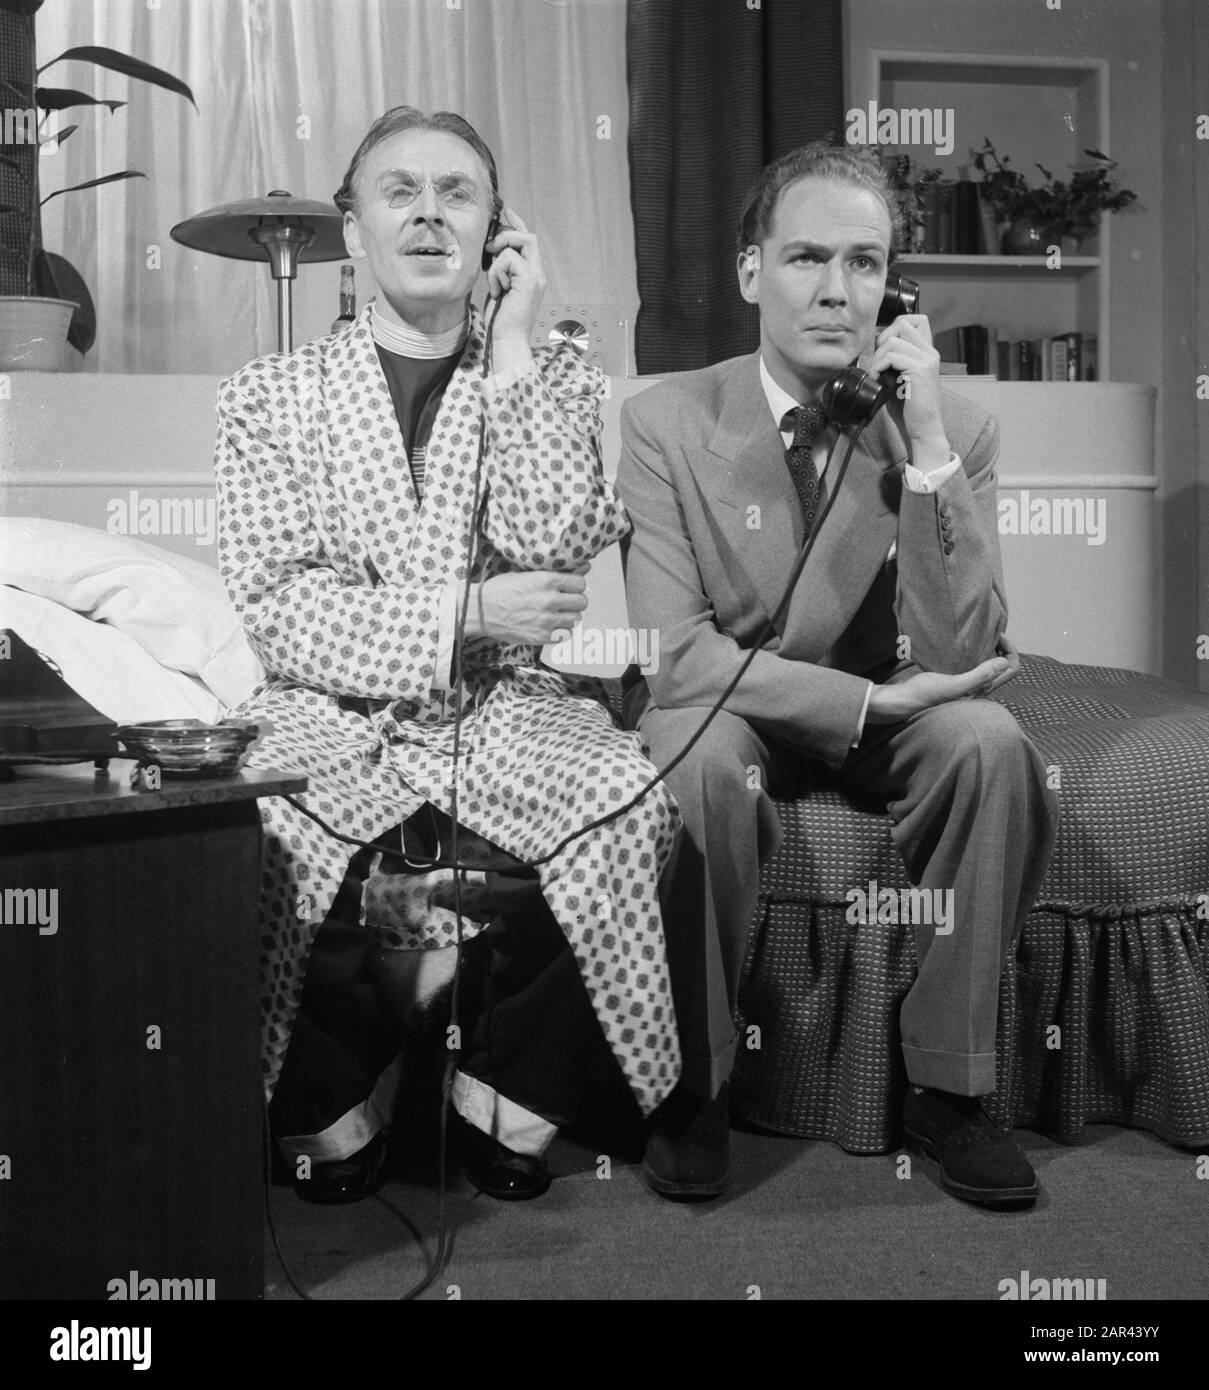 Scene from Nina, by André Roussin, by the Dutch Comedy. Henk Rigters and Guus Oster (right) Date: 30 August 1950 Keywords: actors, theatre, actors Personal name: Oster, Guus, Rigters, Henk Institutional name: Dutch Comedy, Rigters, Henk Stock Photo